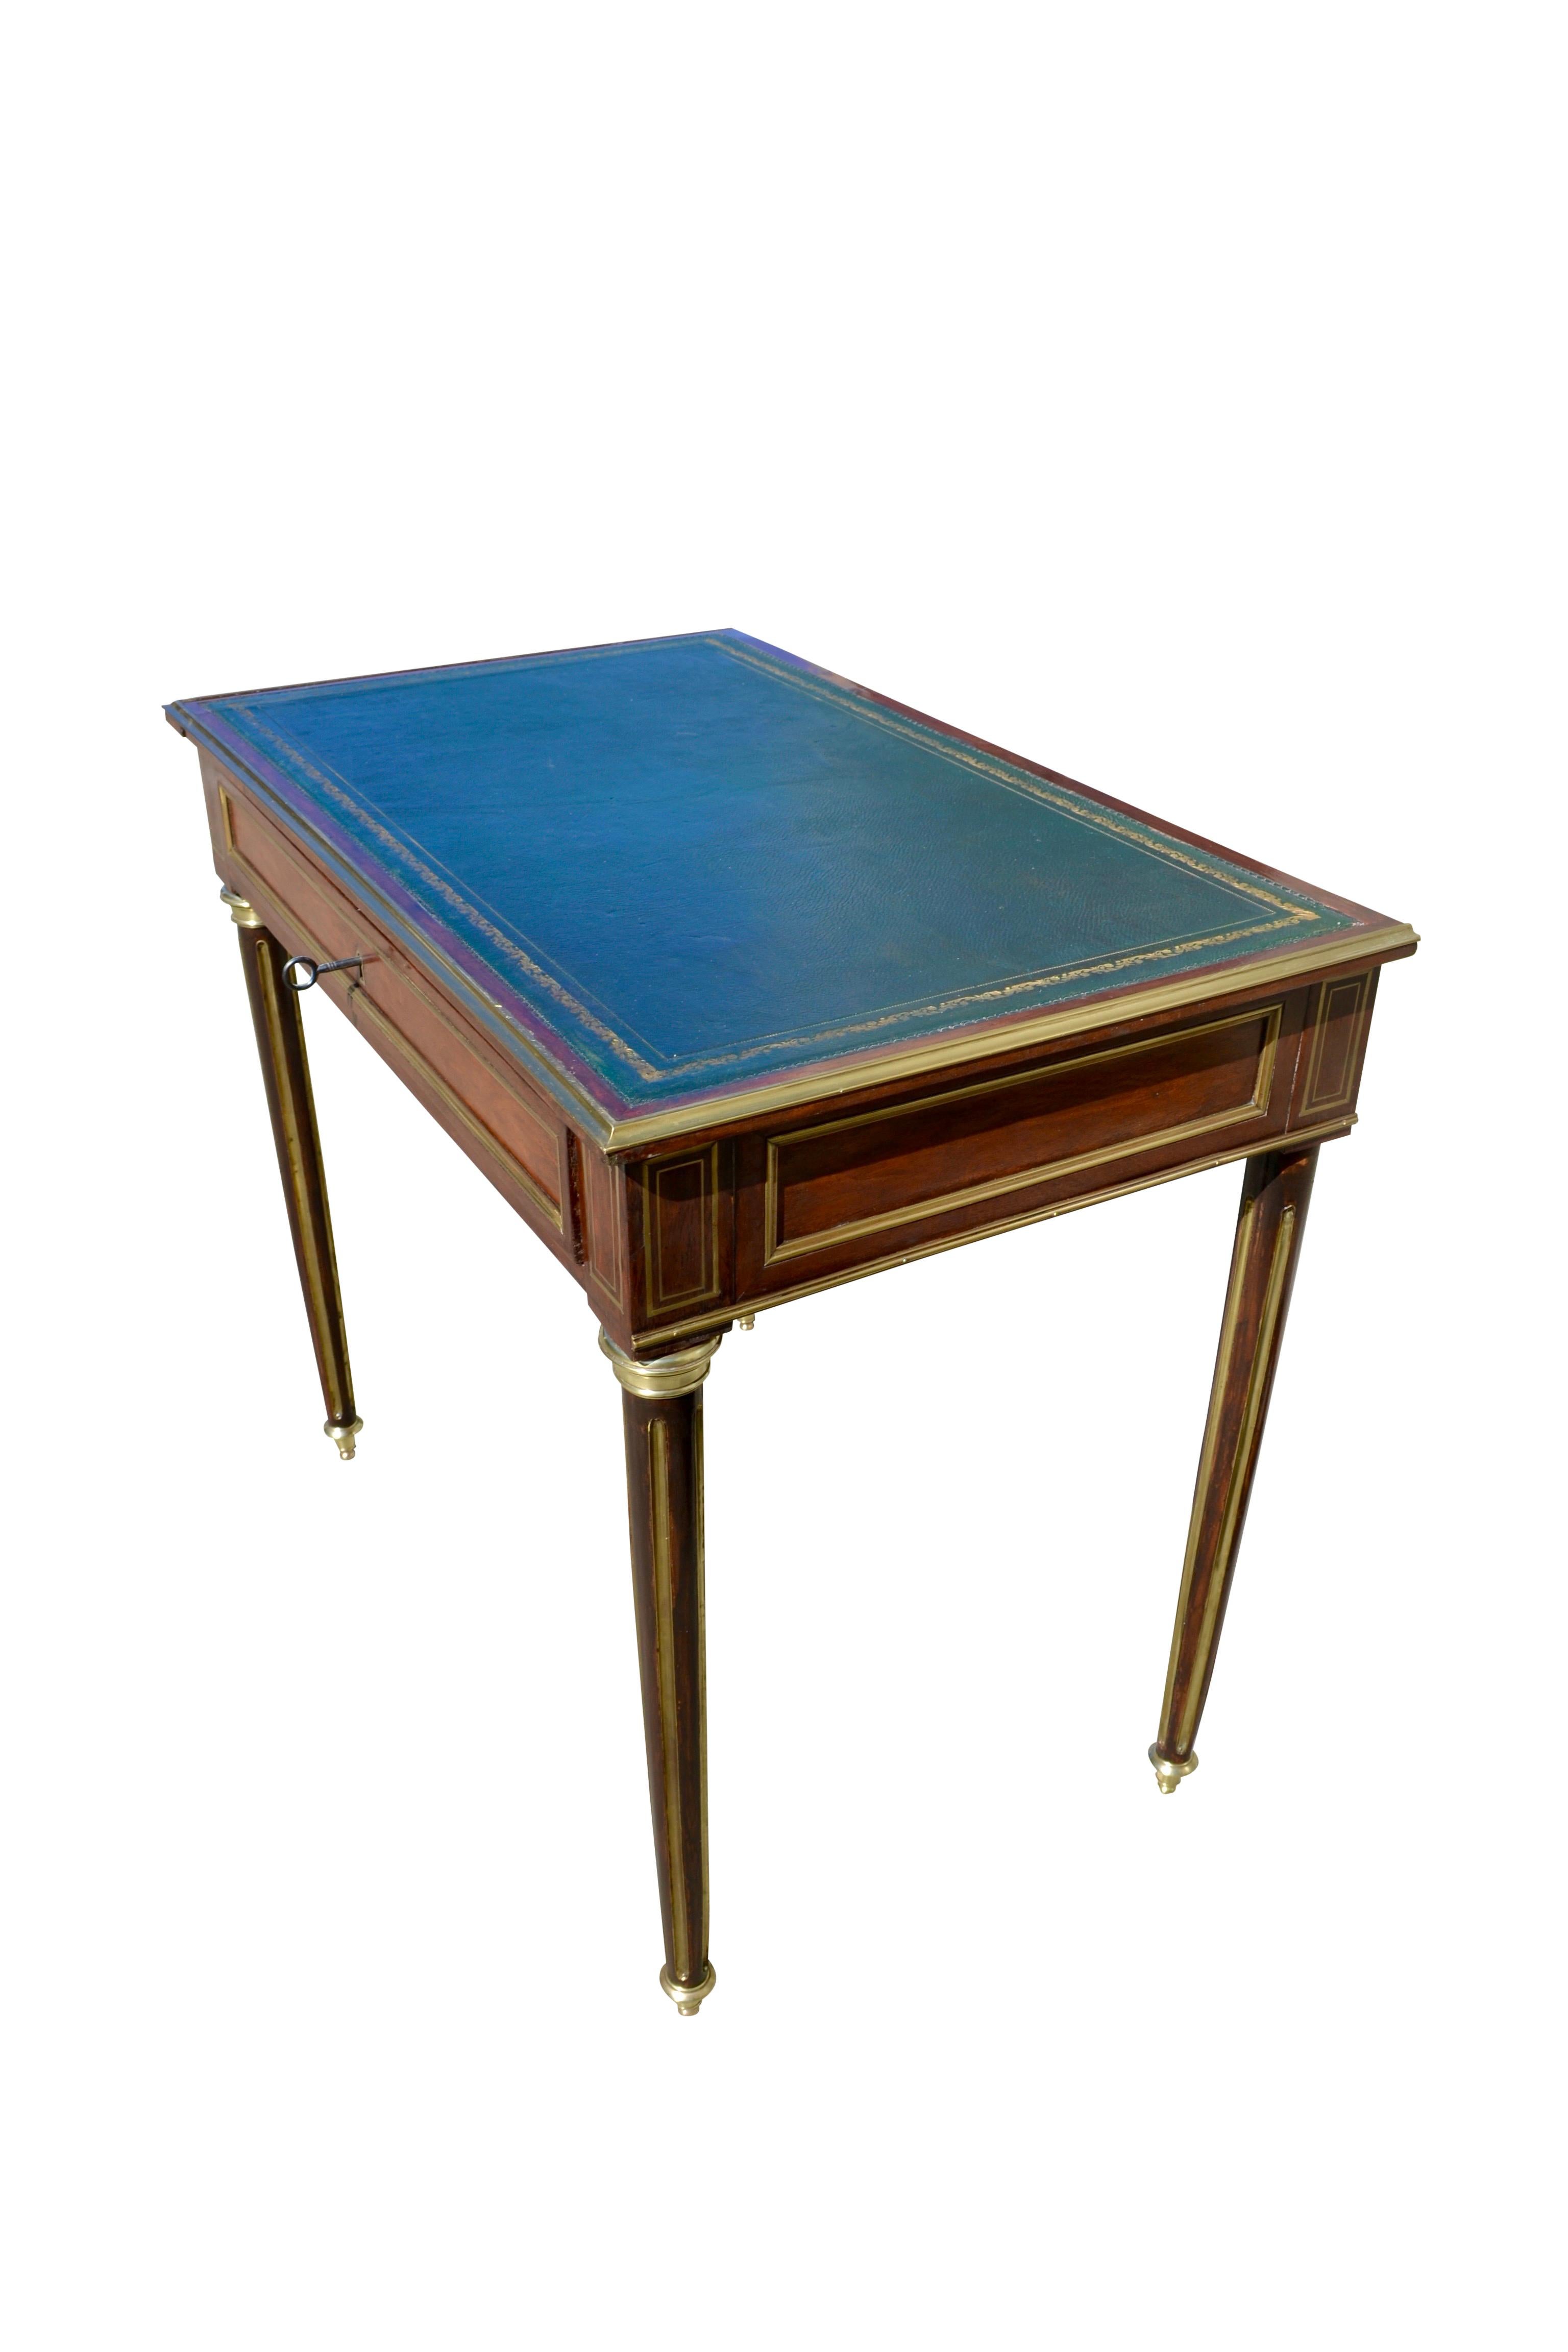 French Late 19thc Louis XVI Style Mahogany Brass Trimmed Writing Desk/Console For Sale 1